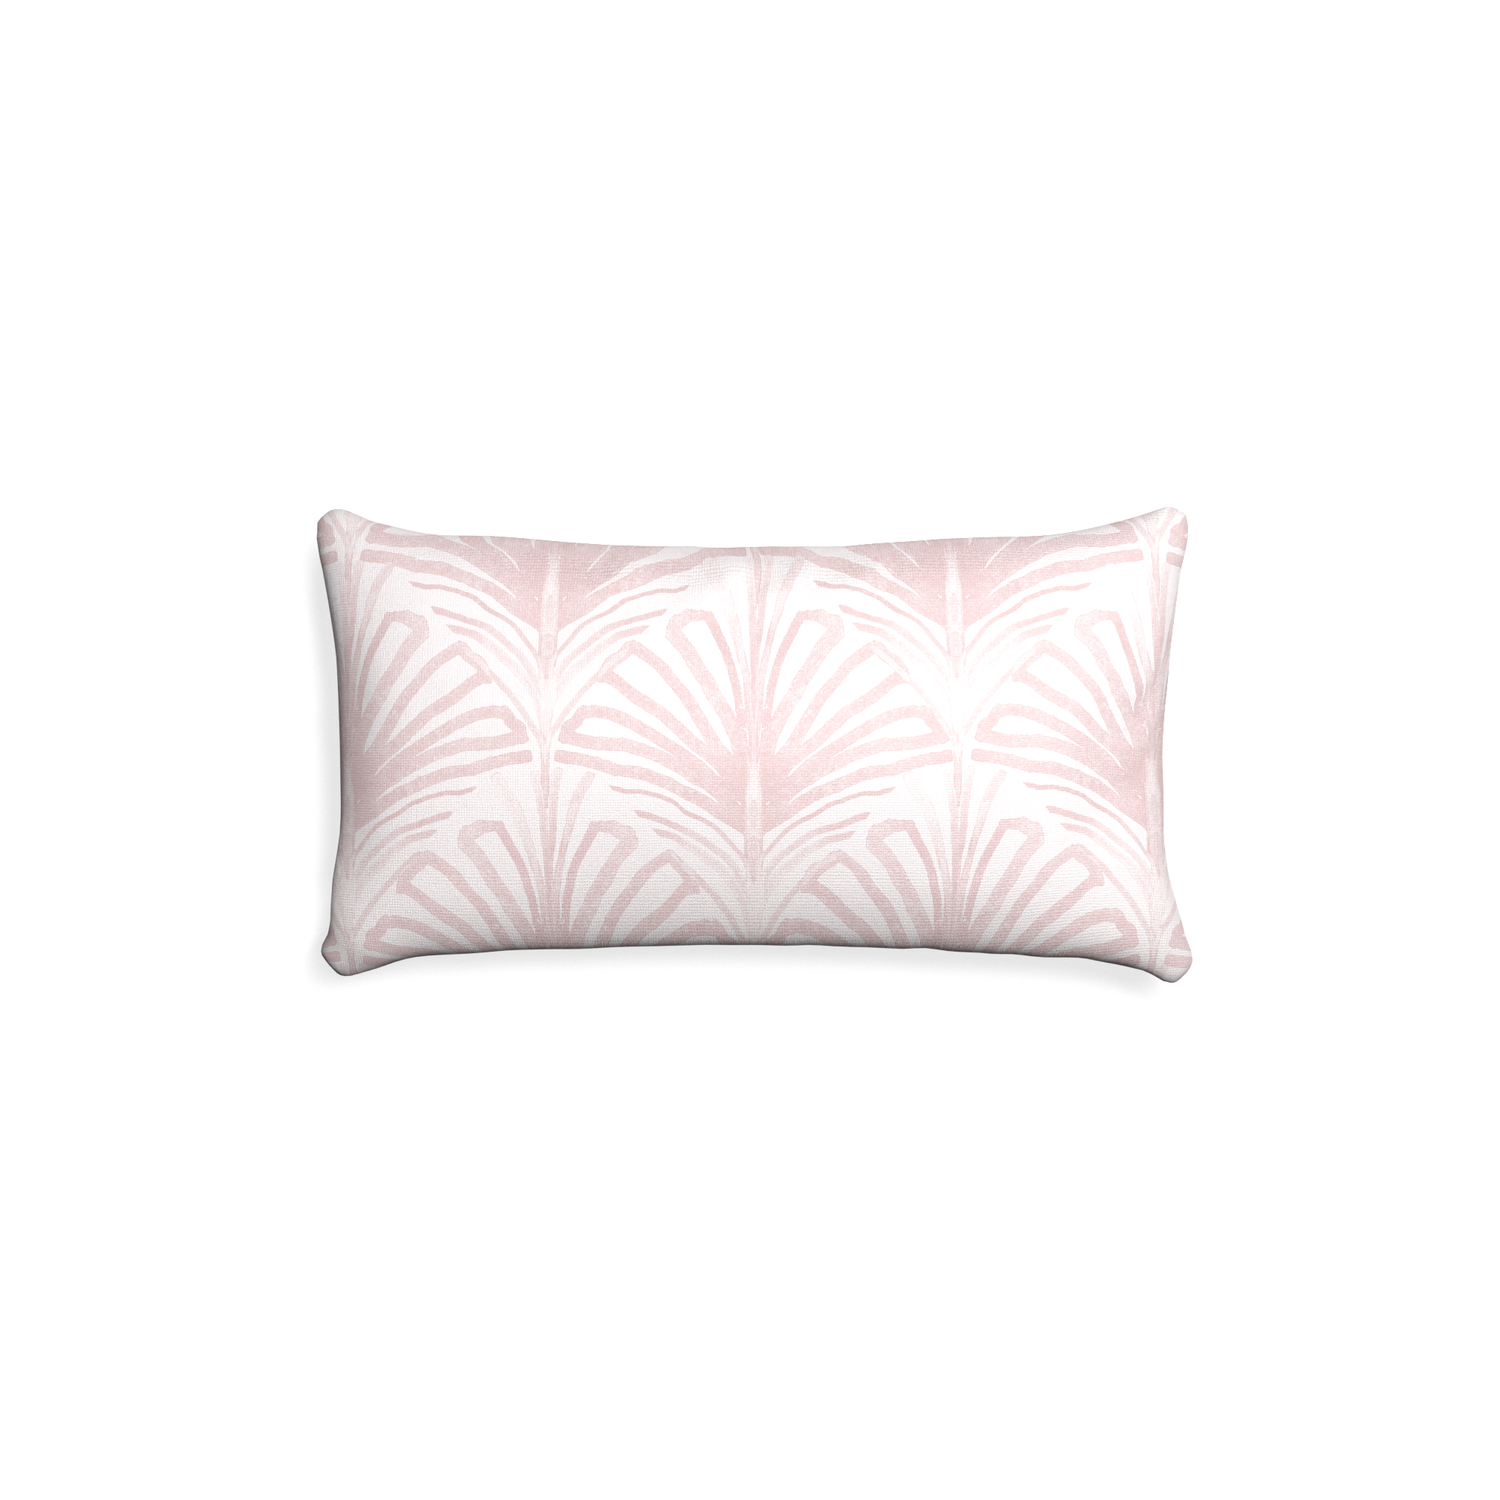 Petite-lumbar suzy rose custom rose pink palmpillow with none on white background